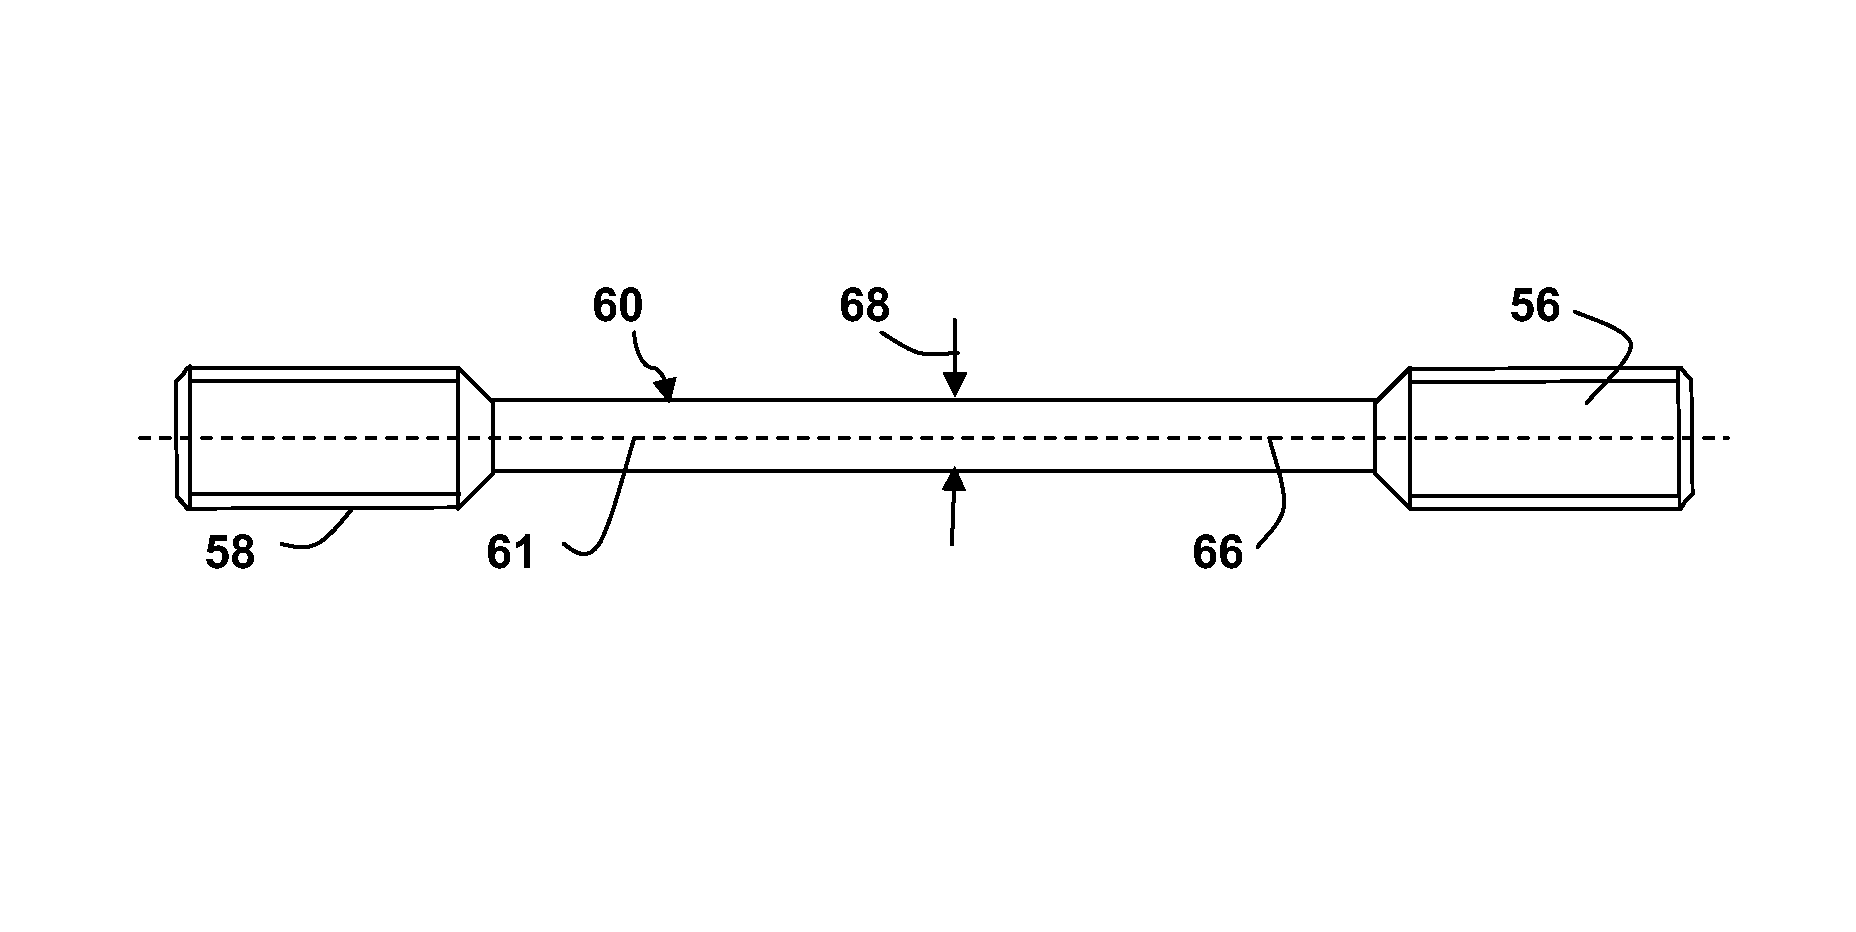 Wind turbine blade attachment configuration with flattened bolts